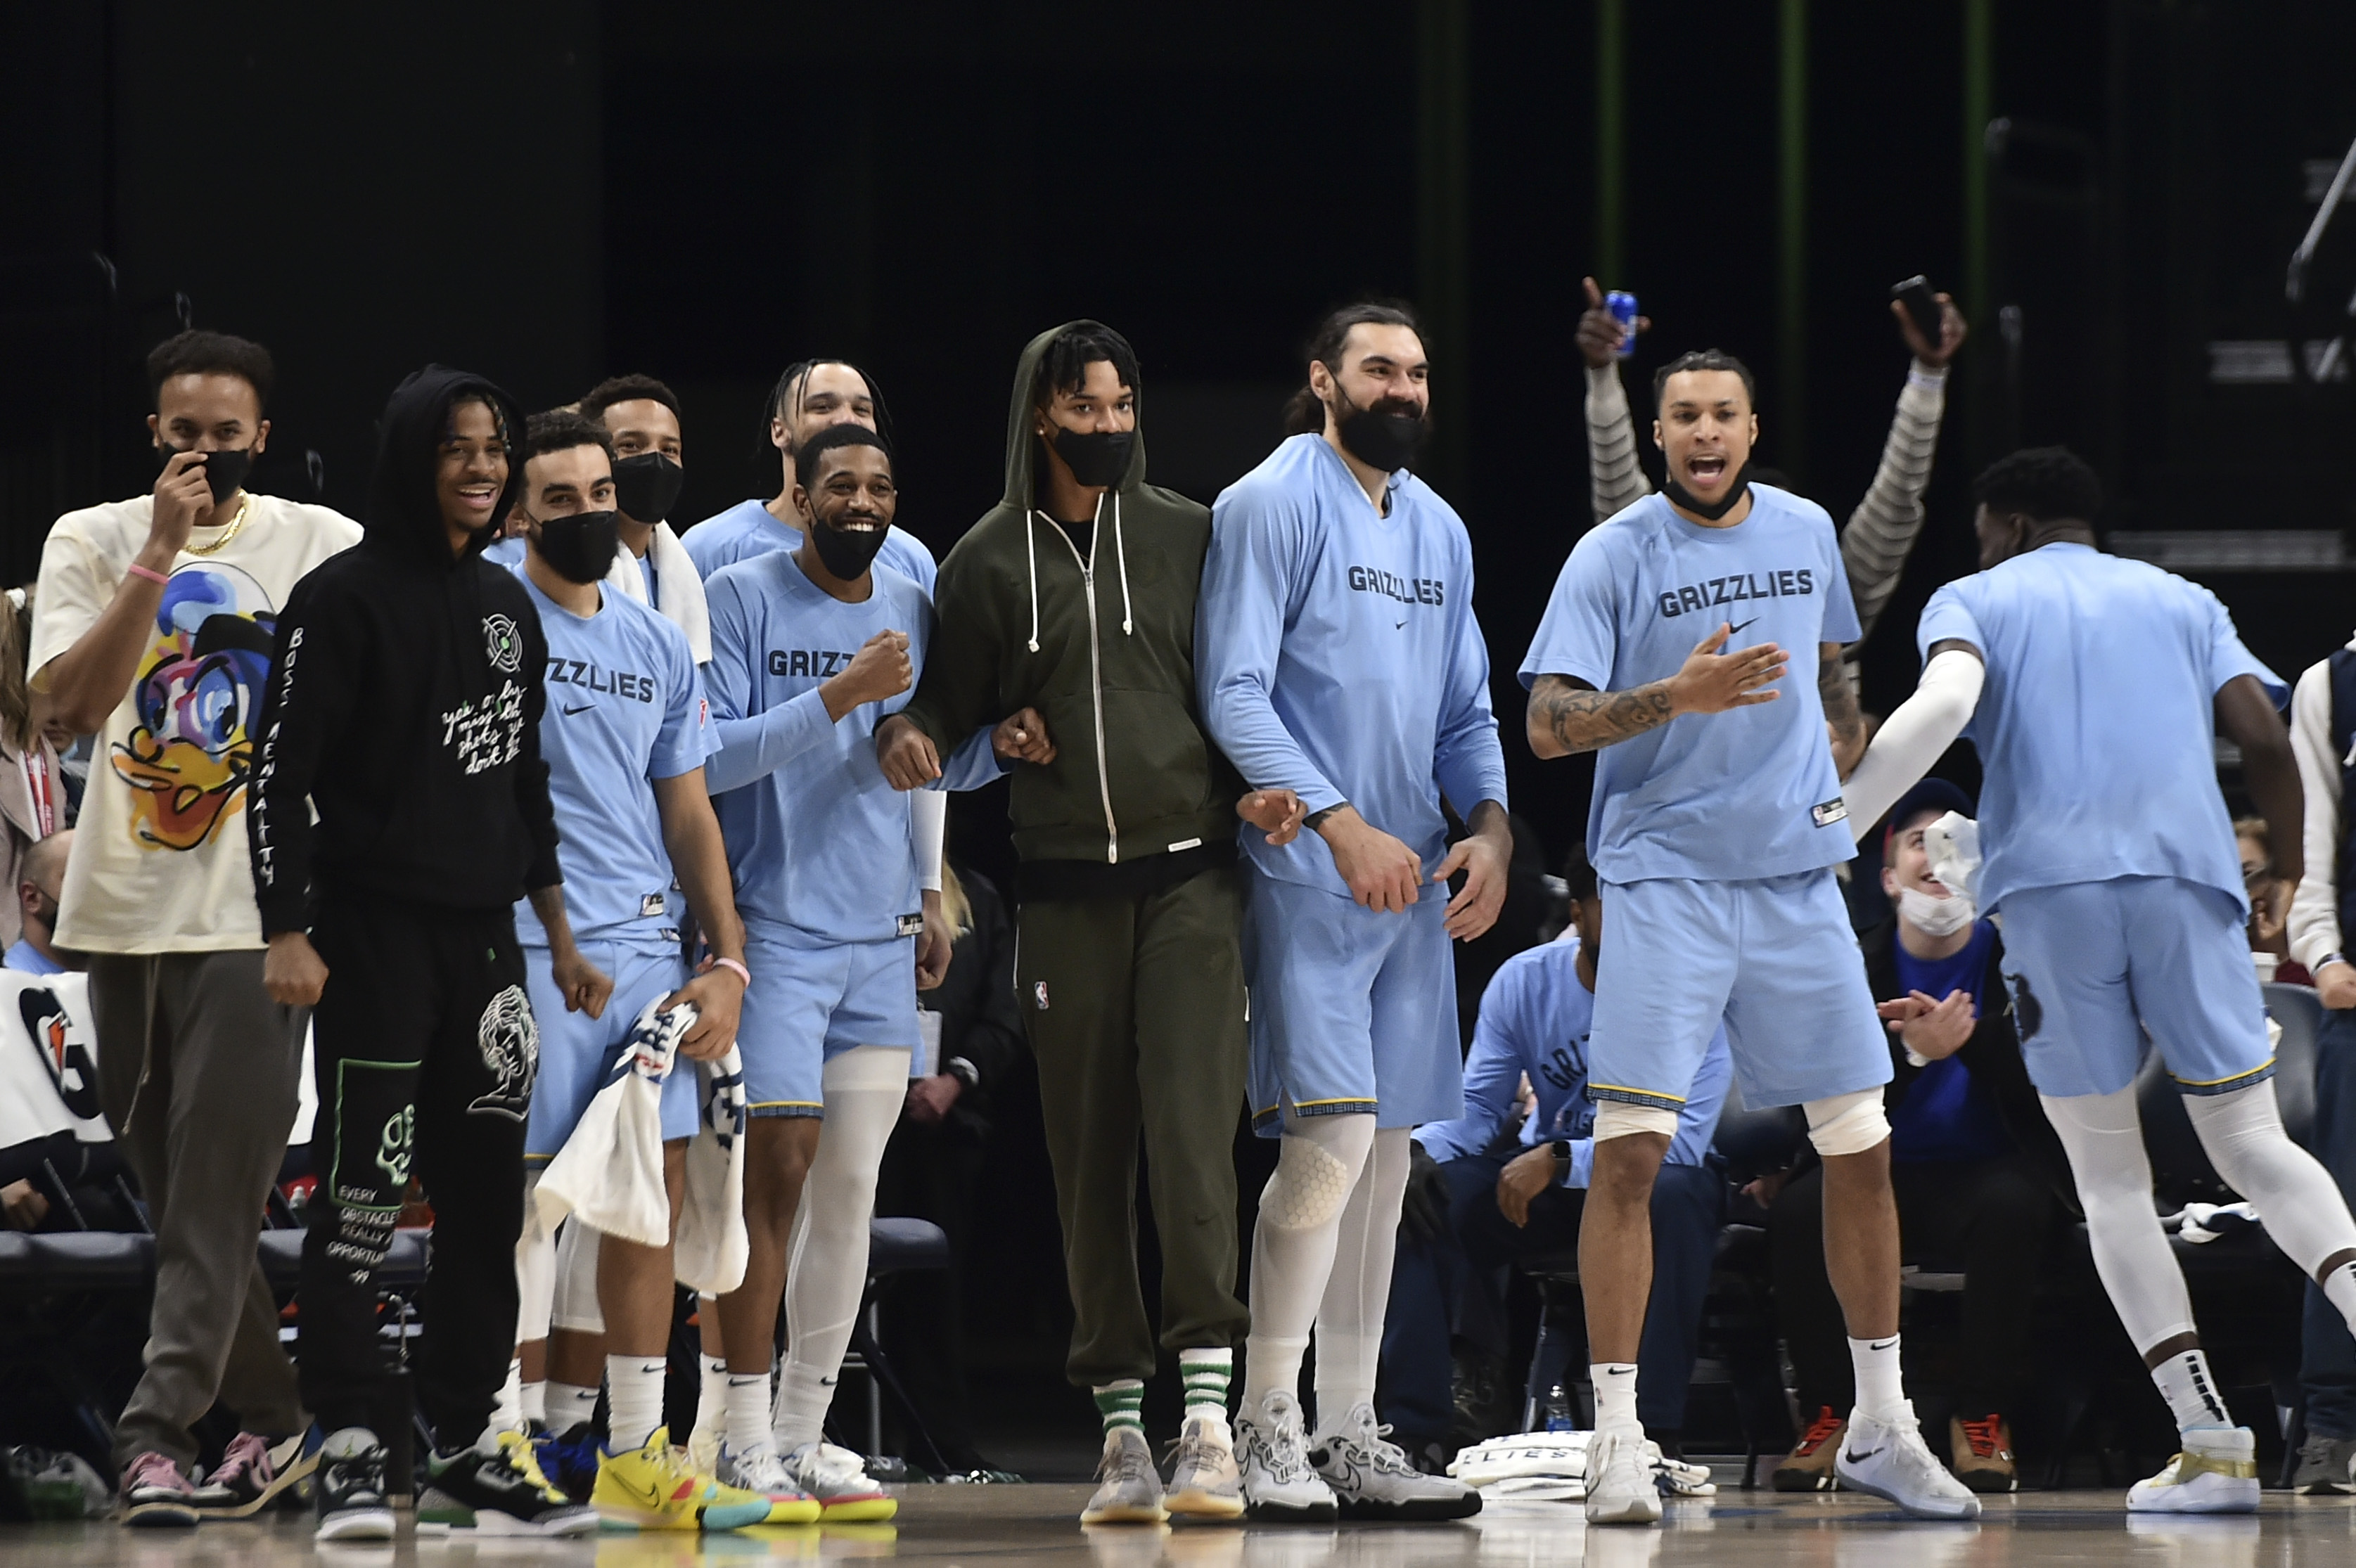 Dec 2, 2021; Memphis, Tennessee, USA; The Memphis Grizzlies bench reacts during the second half against the Oklahoma City Thunder at FedExForum. Mandatory Credit: Justin Ford-USA TODAY Sports